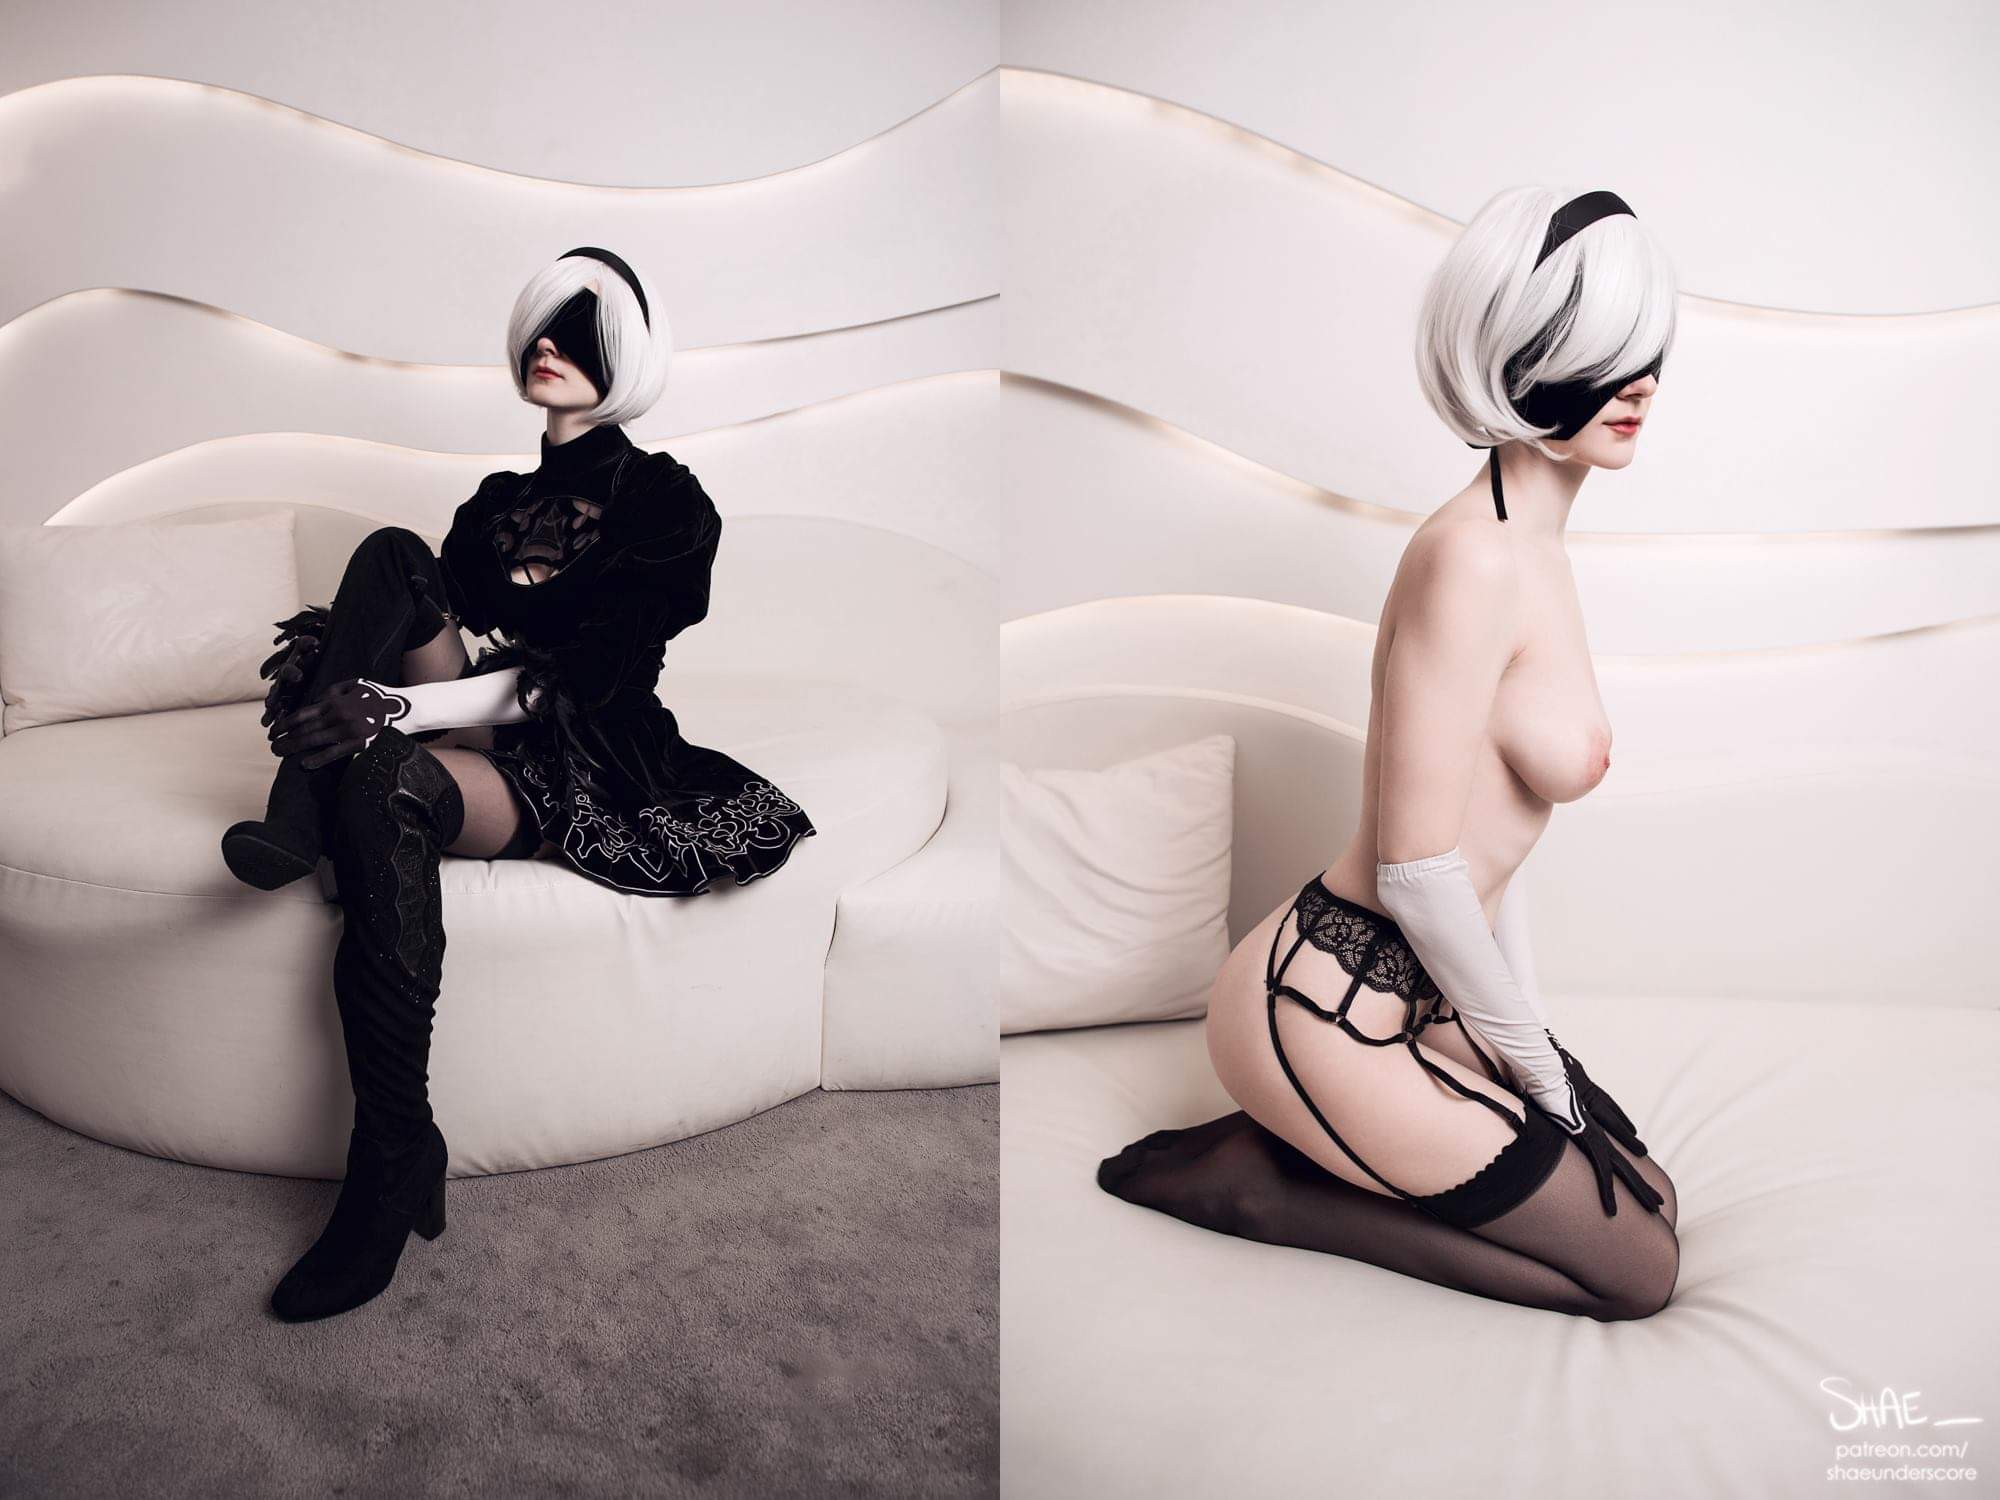 2B on/off by Shae_